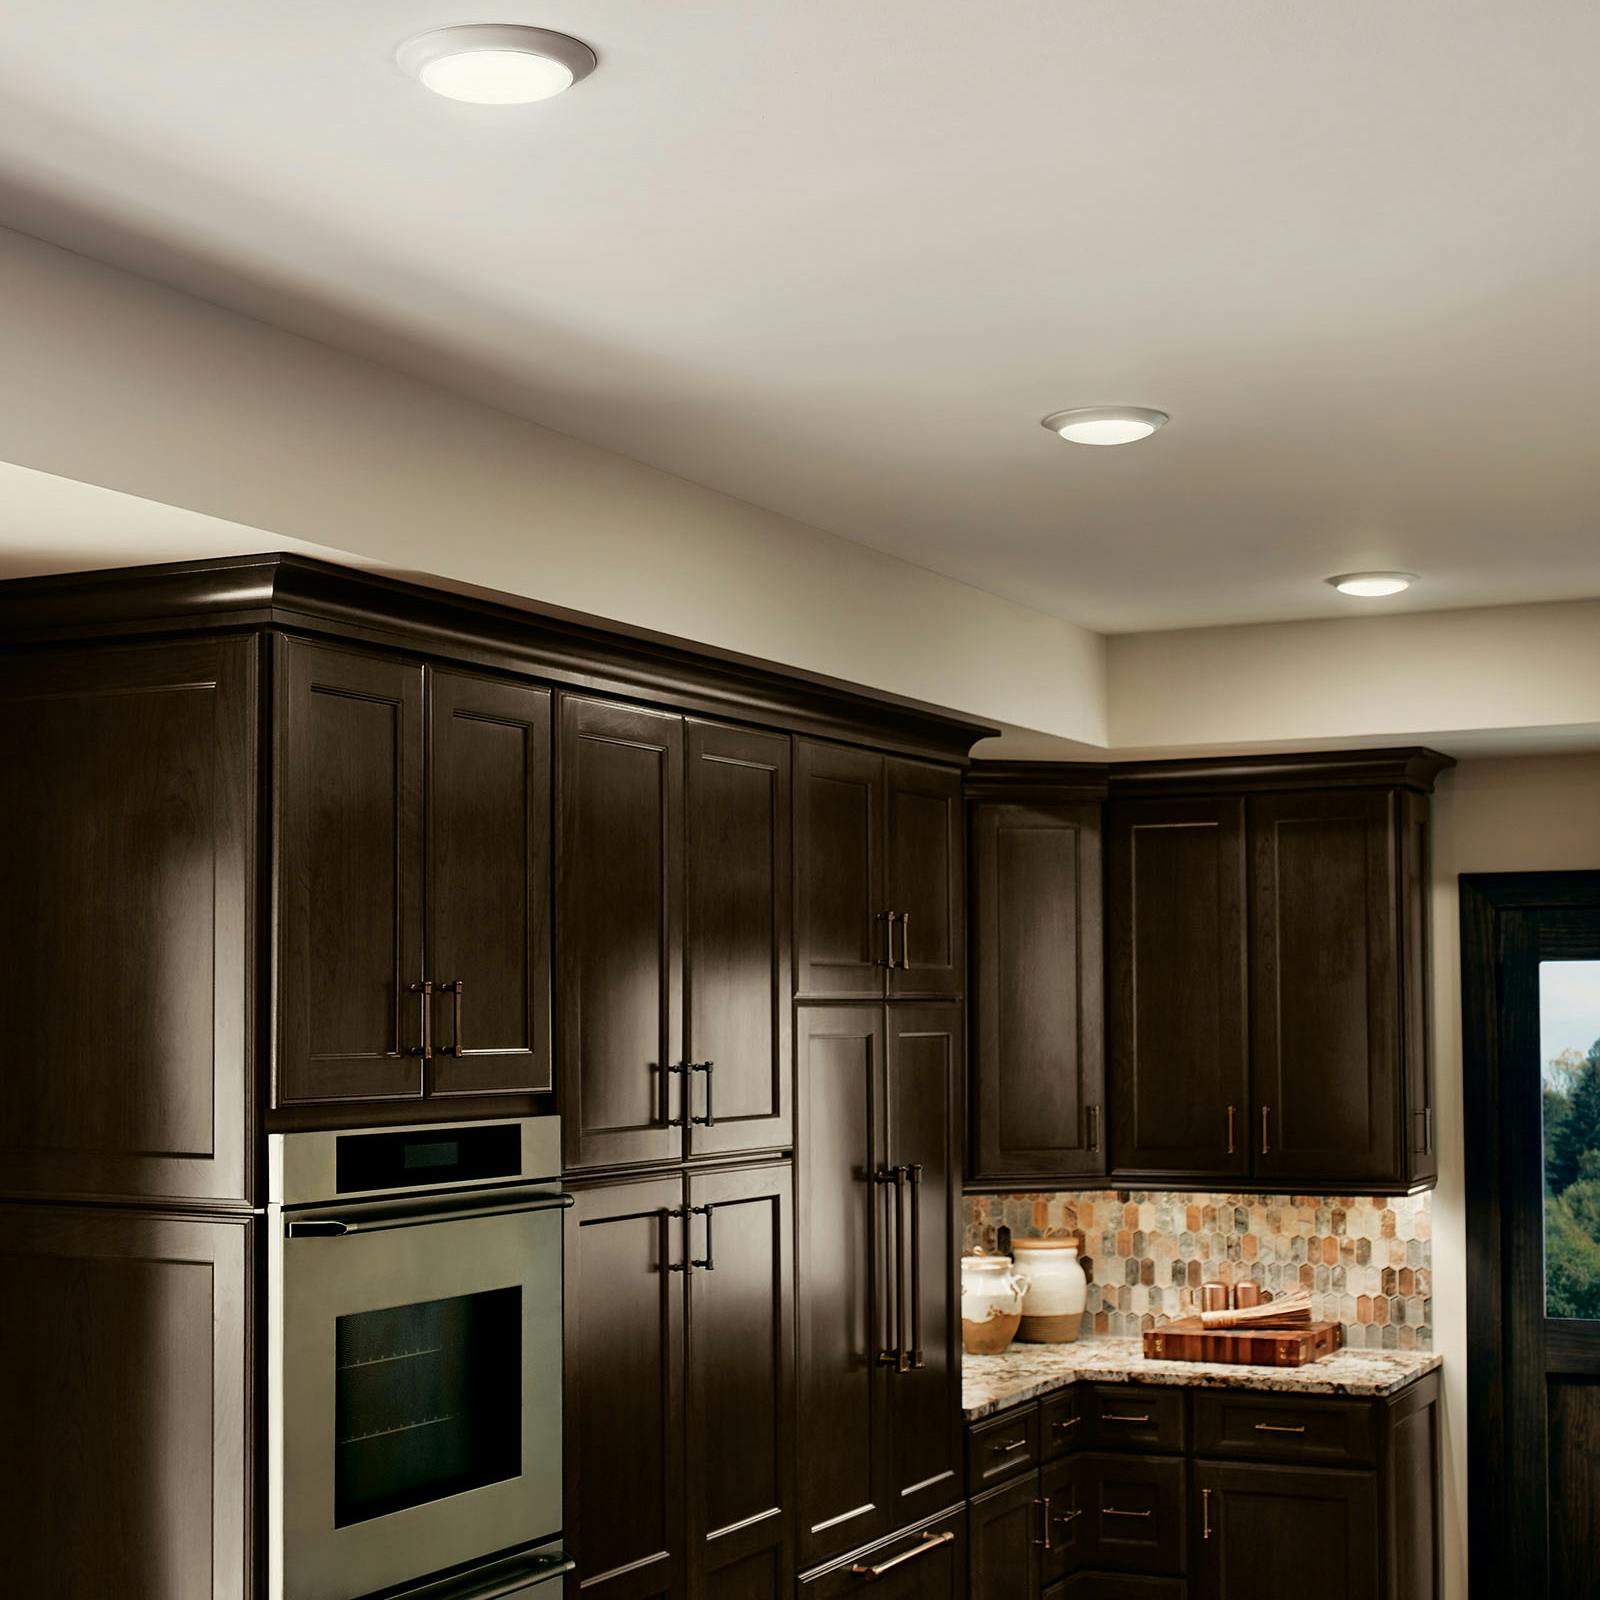 Kitchen featuring 43846WHLED27 and 6T110UH27BK